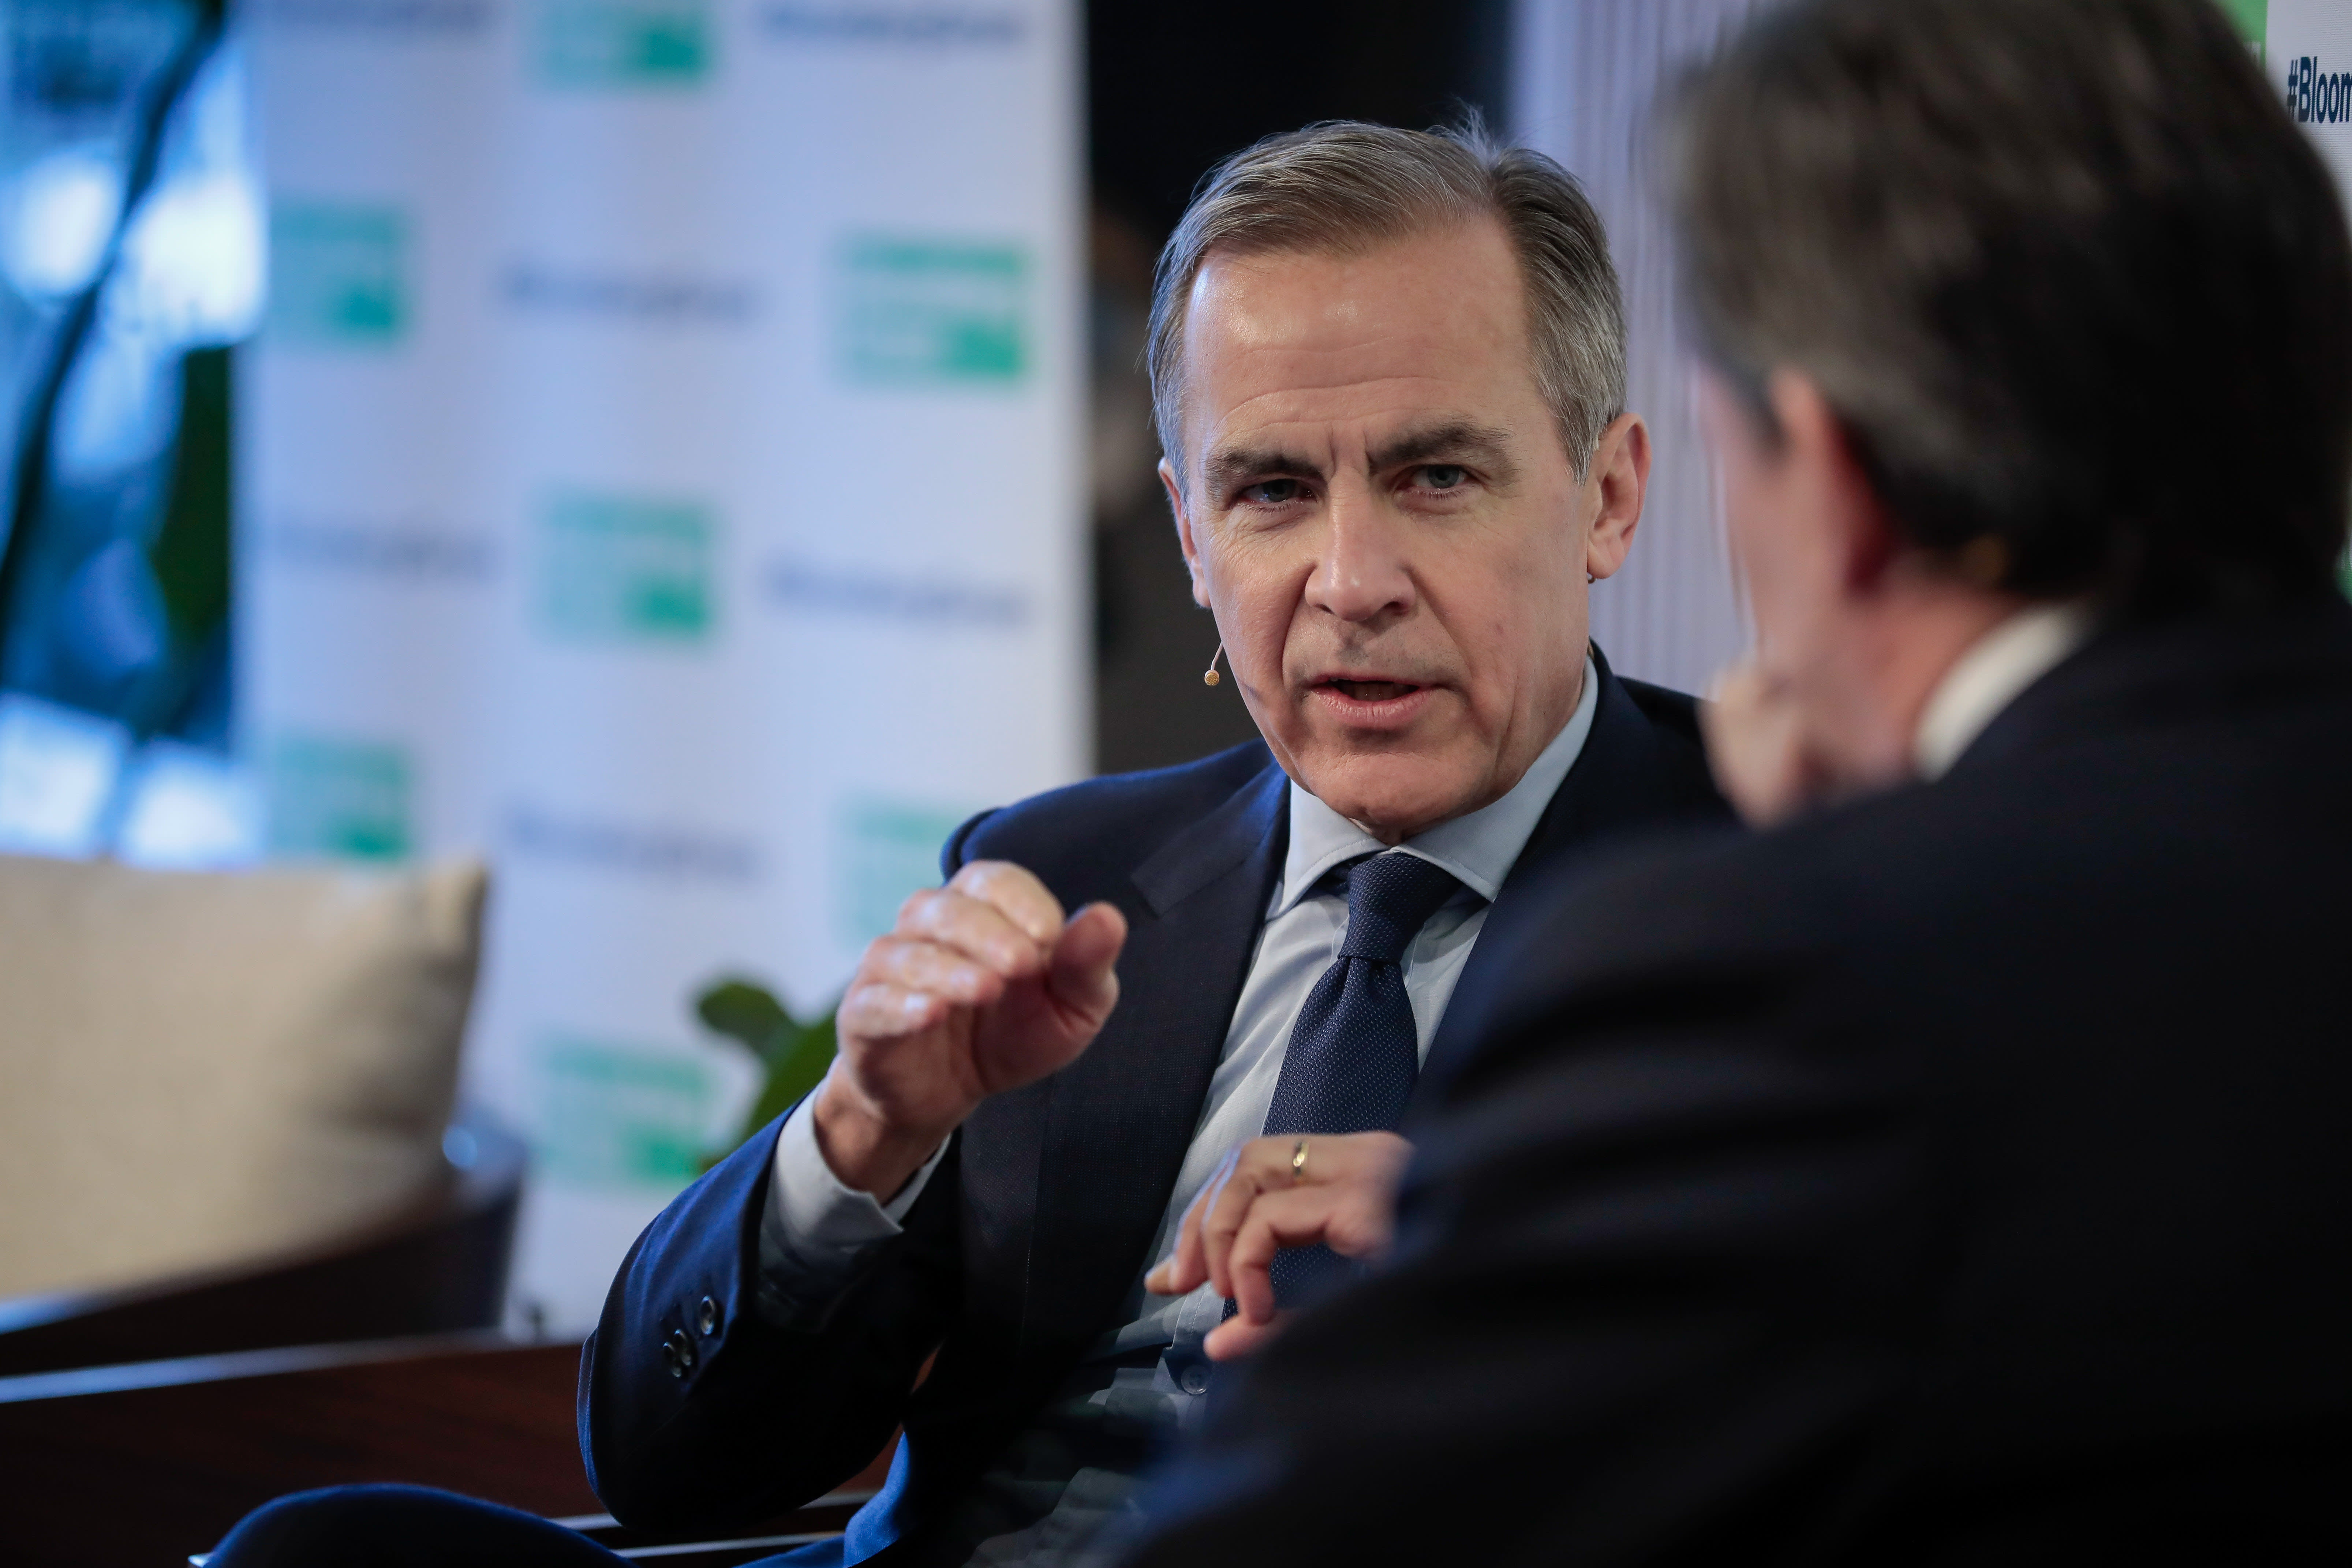 Carney says advisers are central to climate change